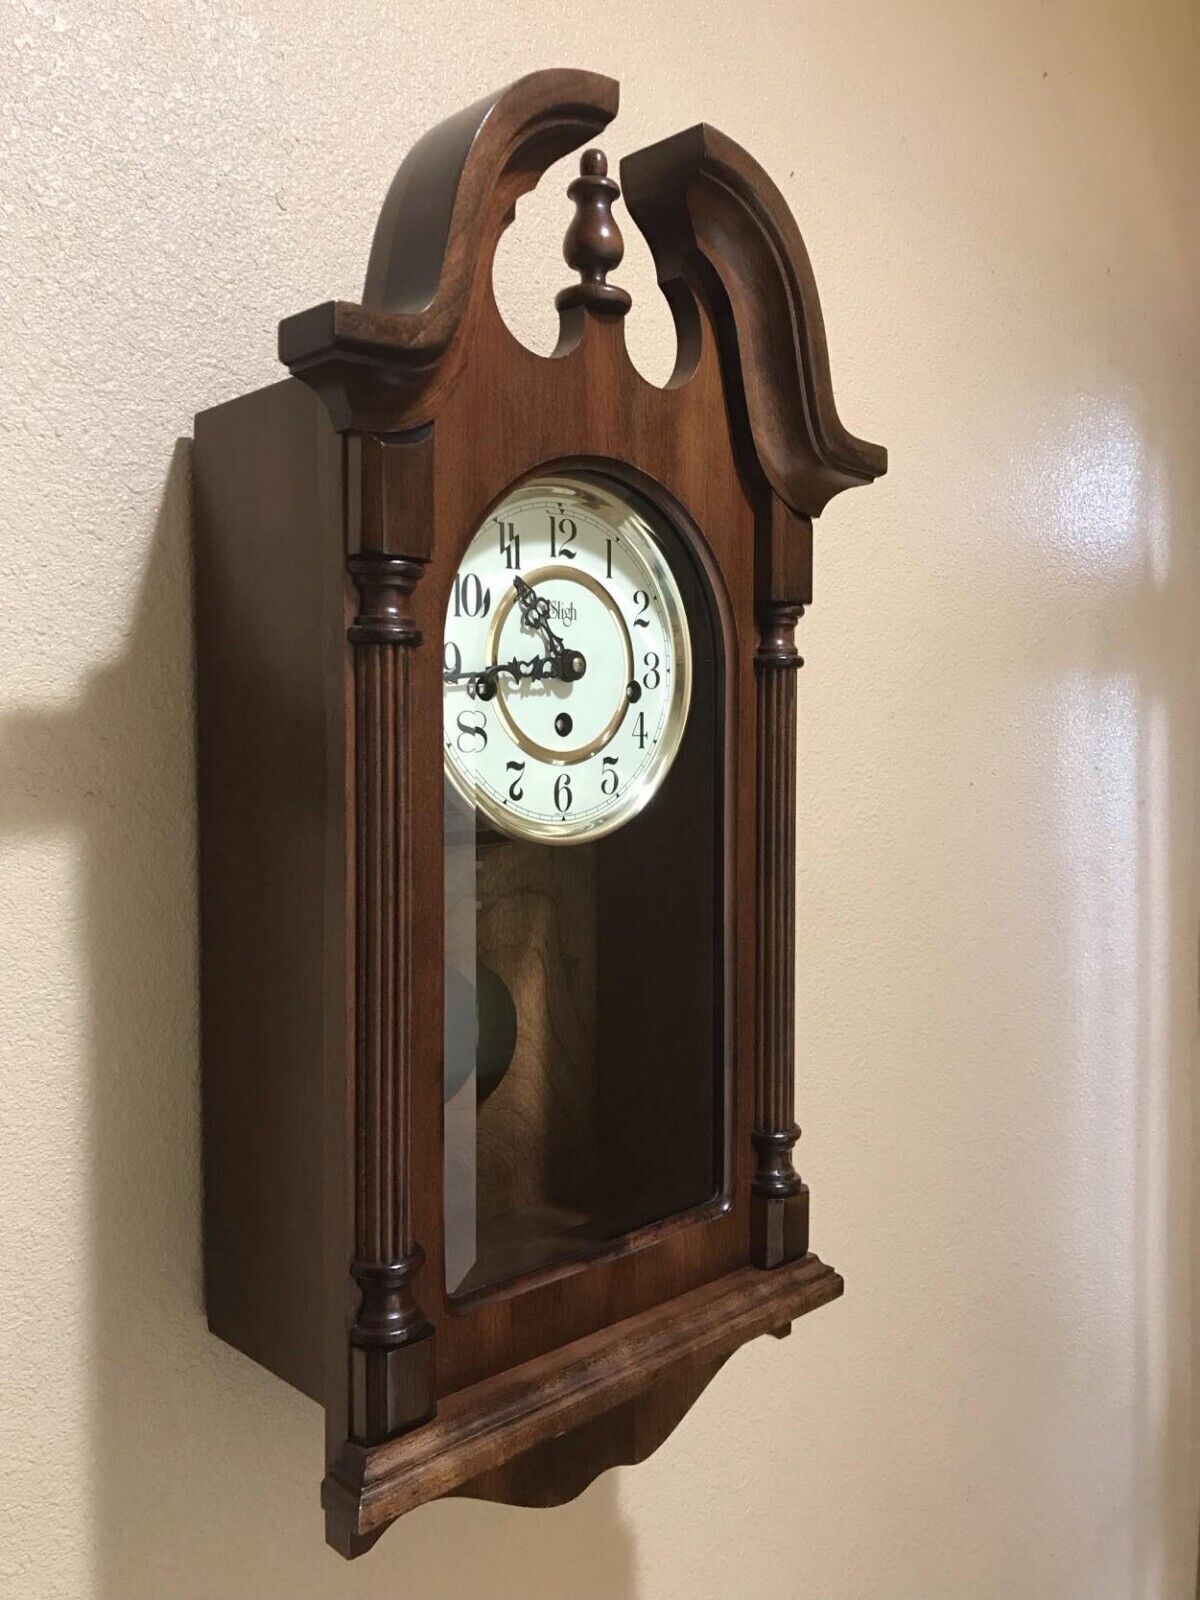 Sligh wall clock - Westminster chime - excellent - Working - Germany